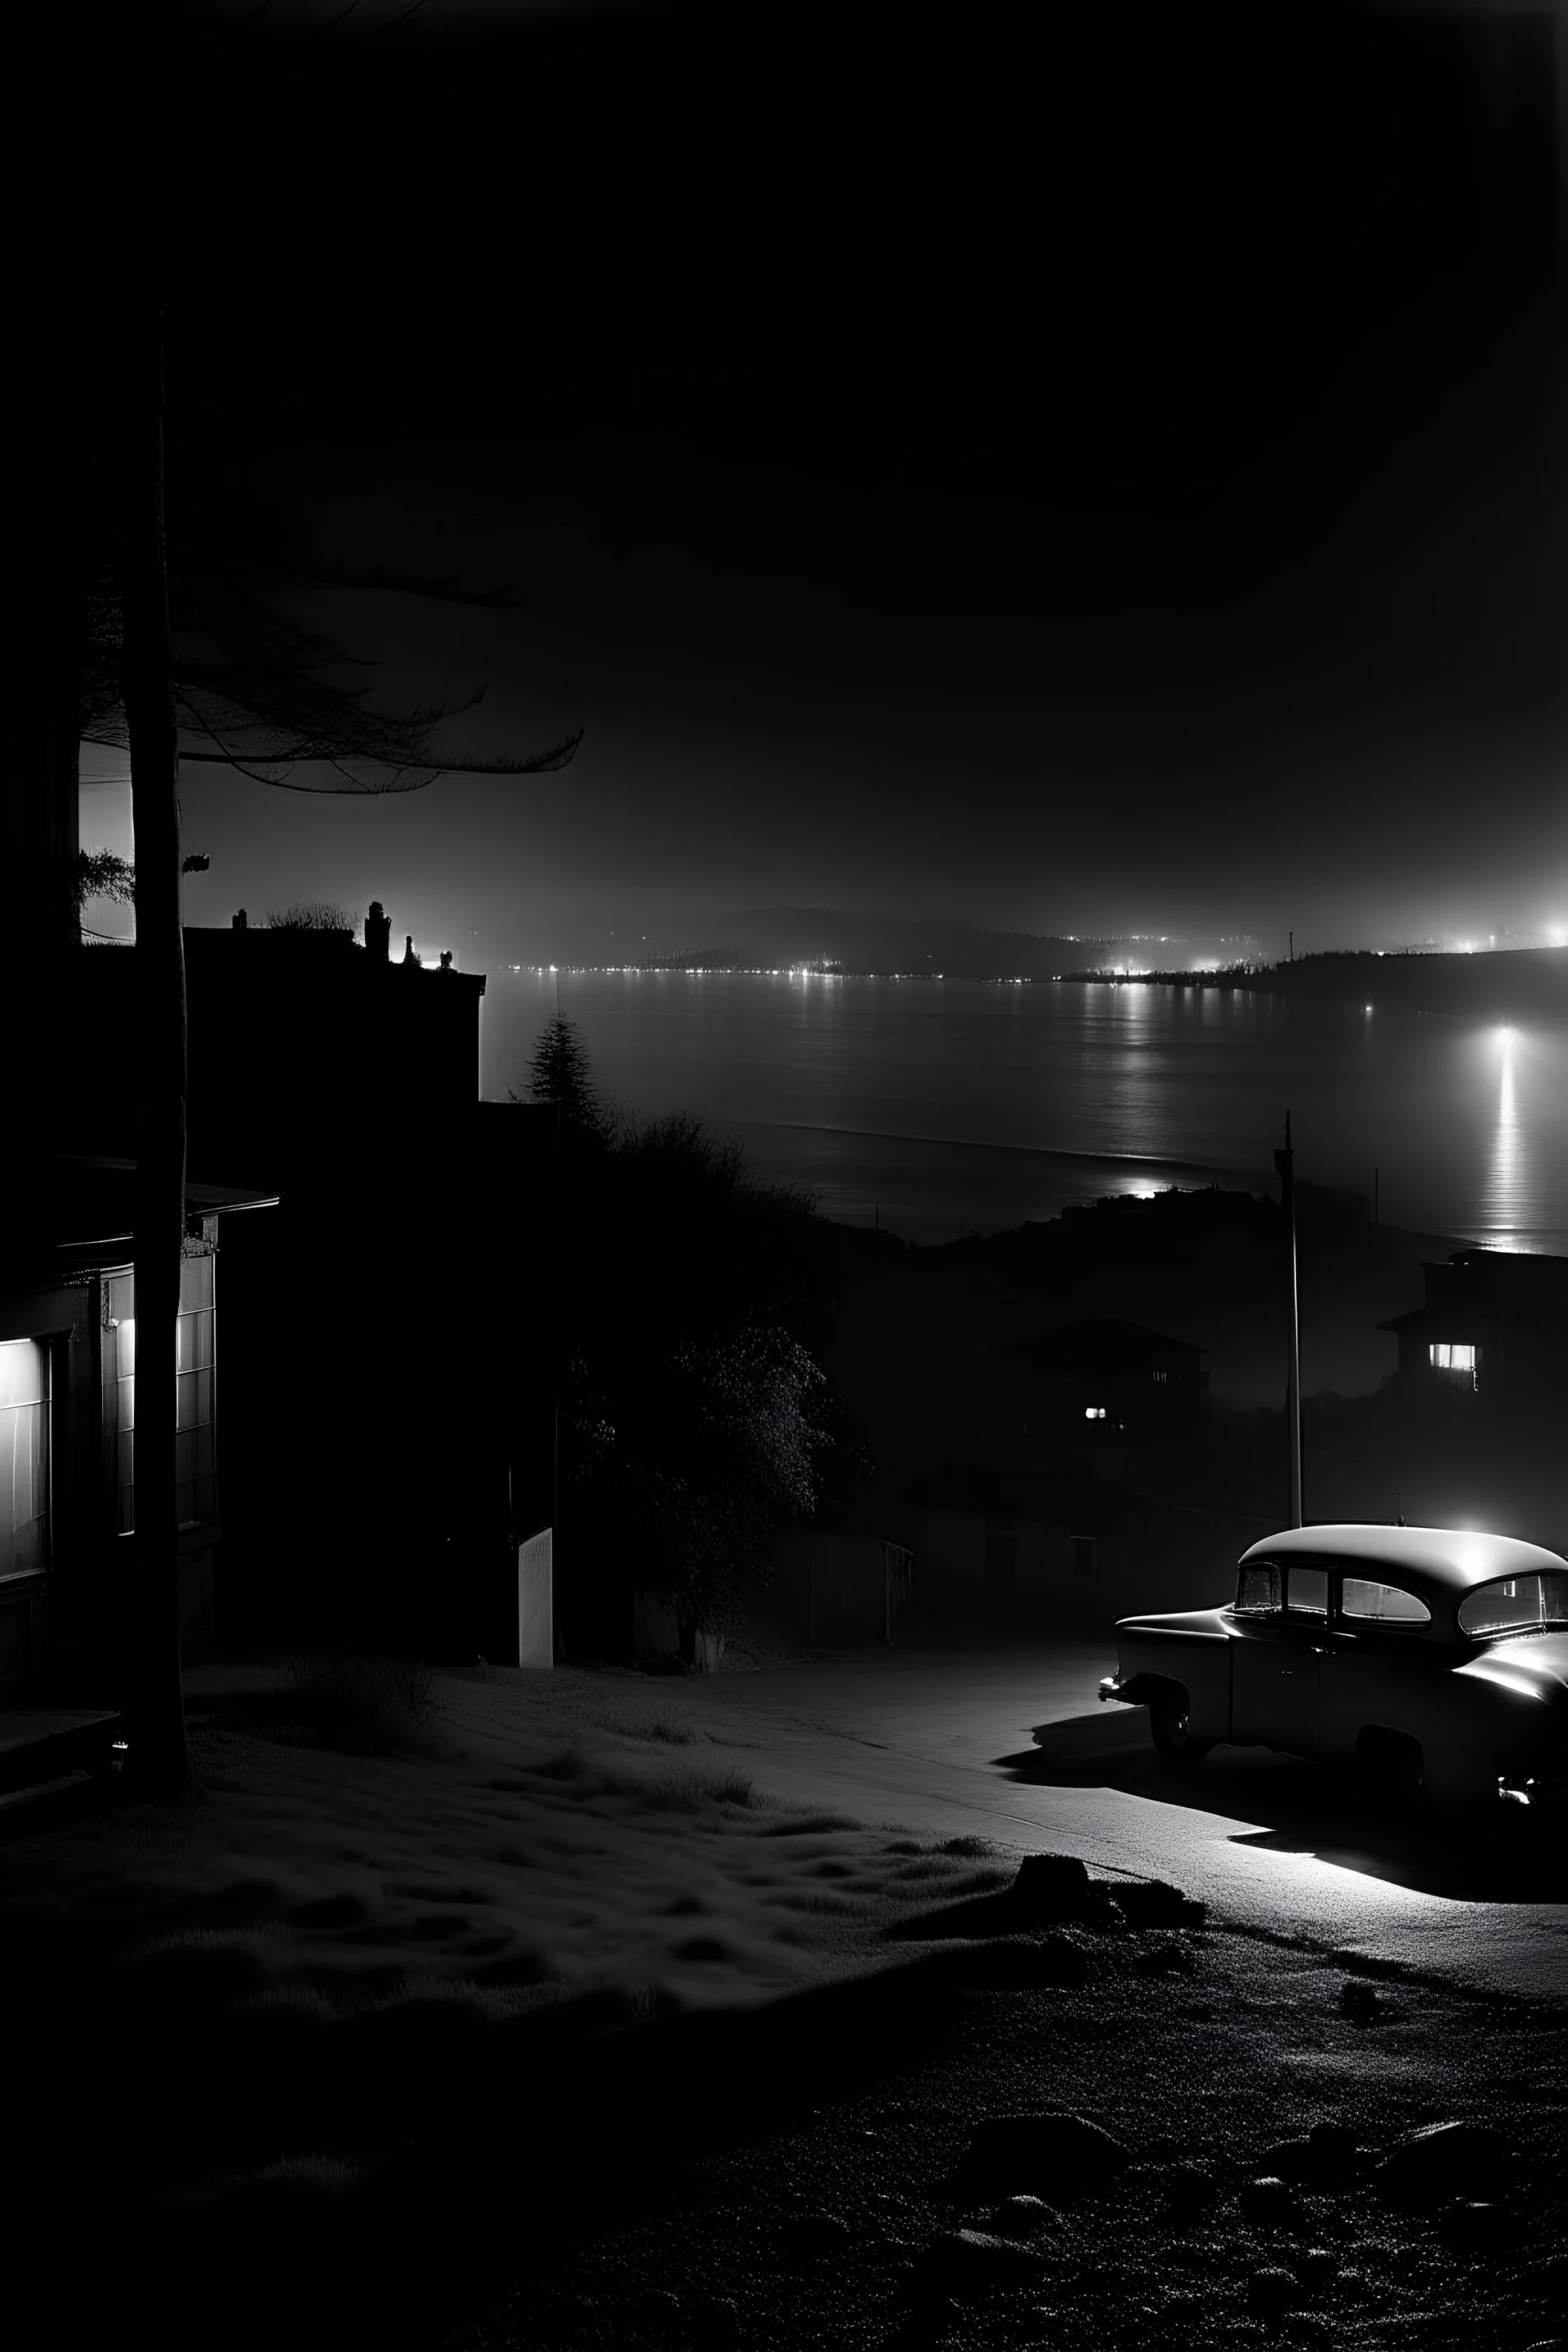 FRED LYON - Foggy night, Land's End, San Francisco, 1953 cinemattic hd hig hlights detailled real wide and depth atmosphere